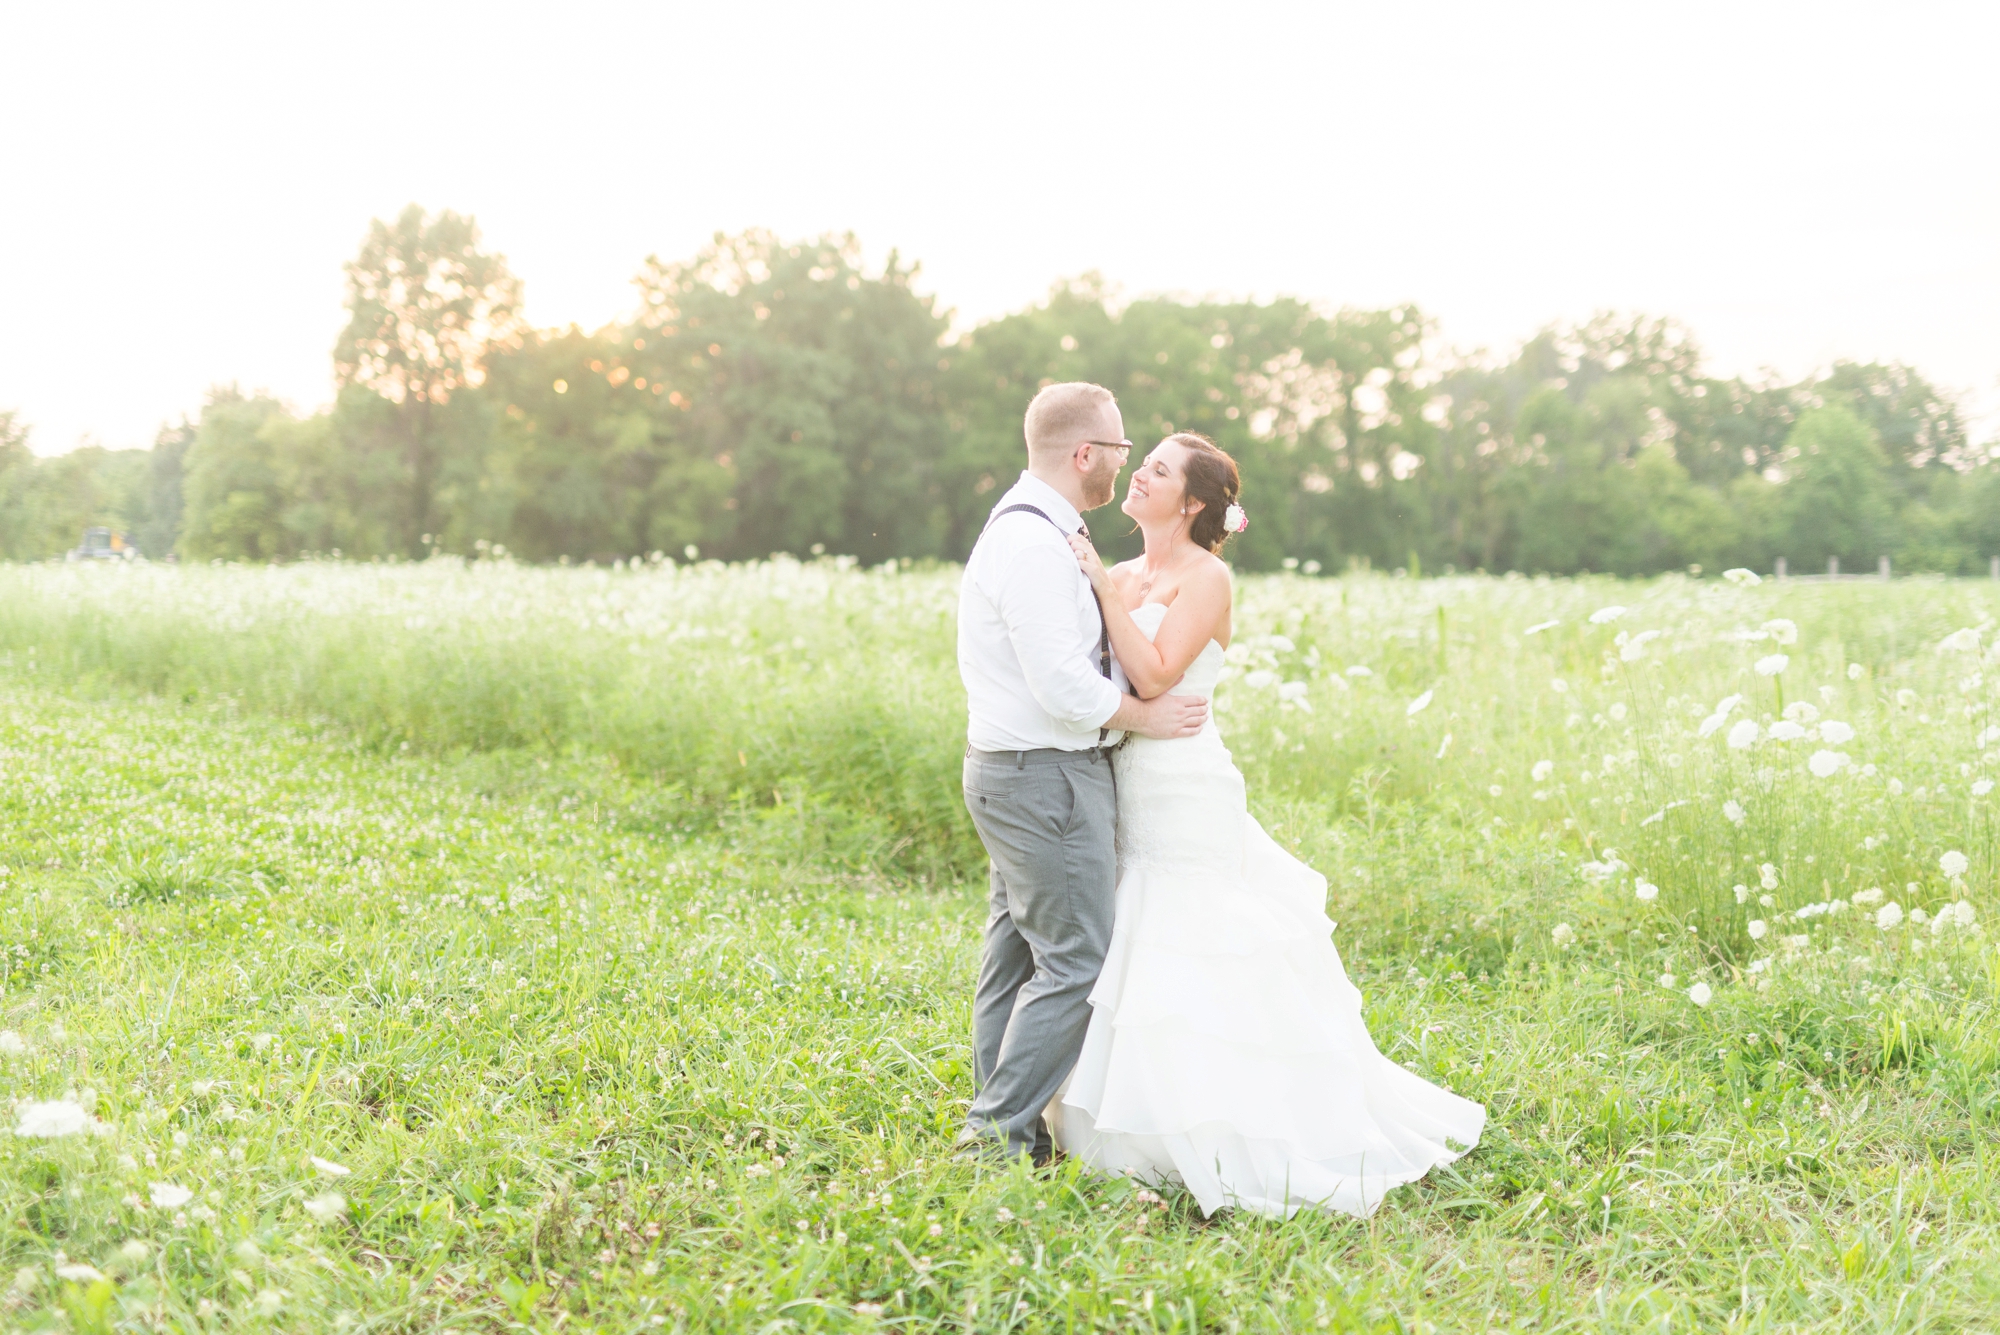 natural-light-wedding-photography-at-jorgensen-farms-westerville-ohio_0653